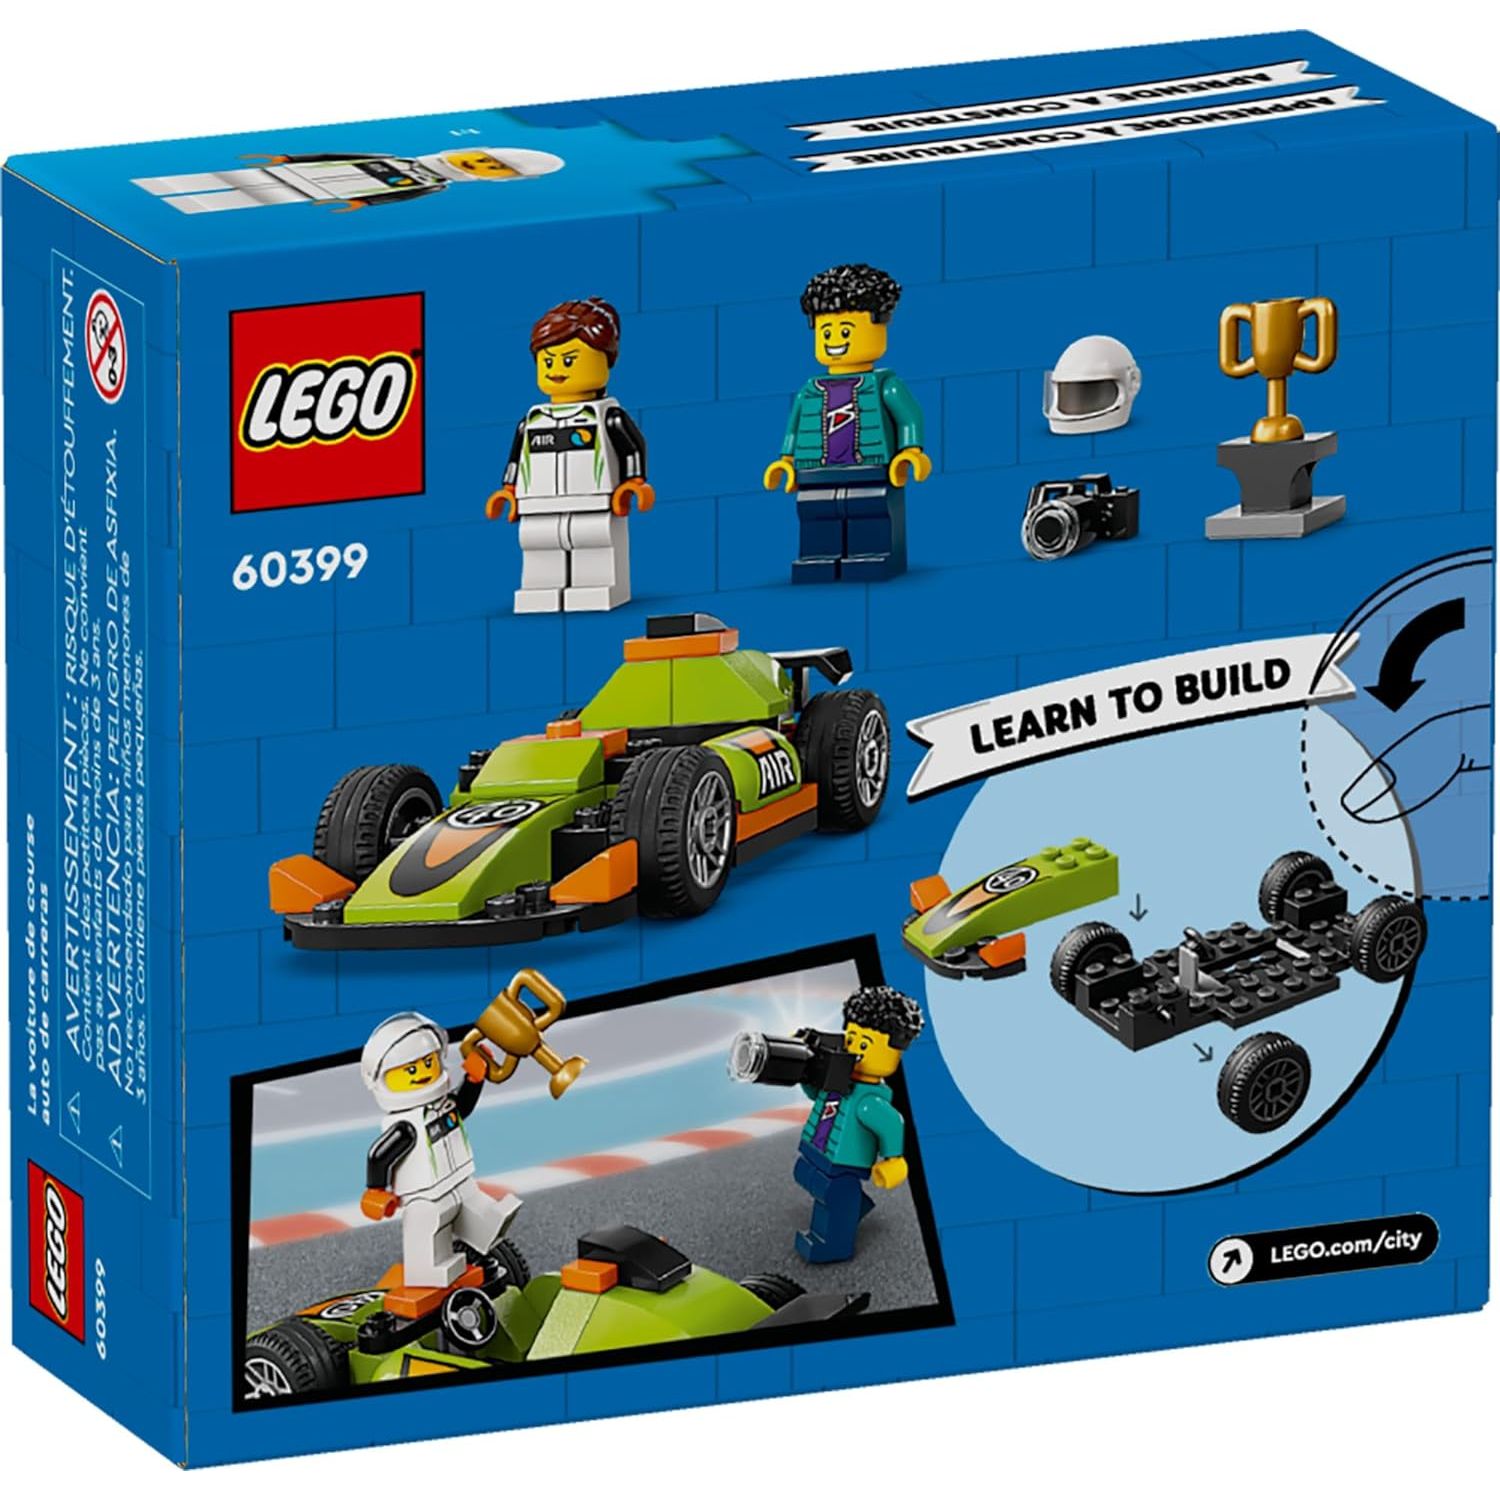 LEGO City Green Race Car Toy 60399, Classic-Style Racing Vehicle